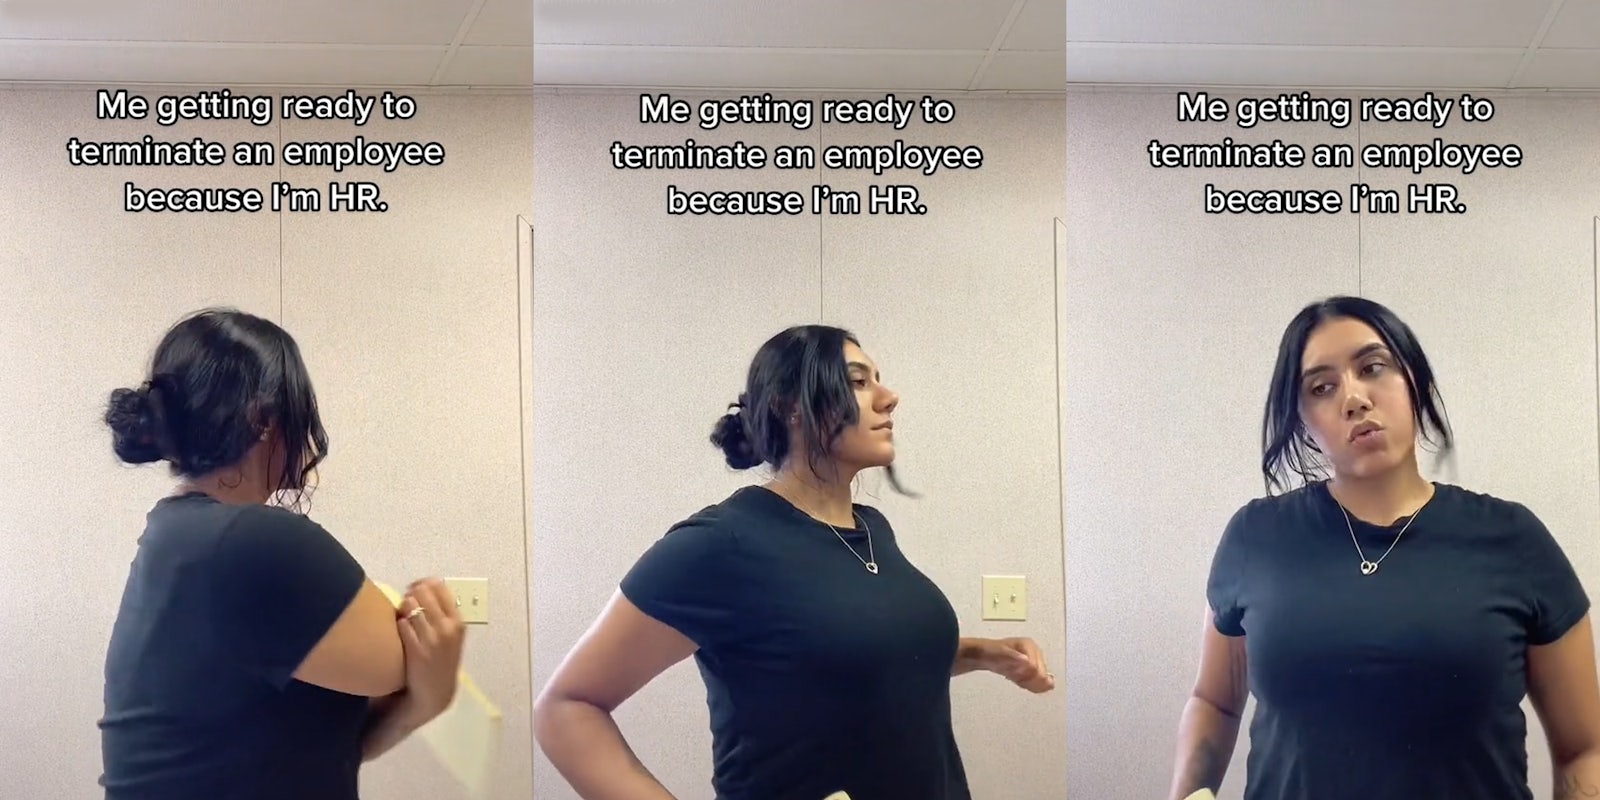 woman stretching arm to side caption 'Me getting ready to terminate an employee because I'm HR.' (l) woman in motion stretching and turning left caption 'Me getting ready to terminate an employee because I'm HR.' (c) woman arms back after stretching caption 'Me getting ready to terminate an employee because I'm HR.' (r)